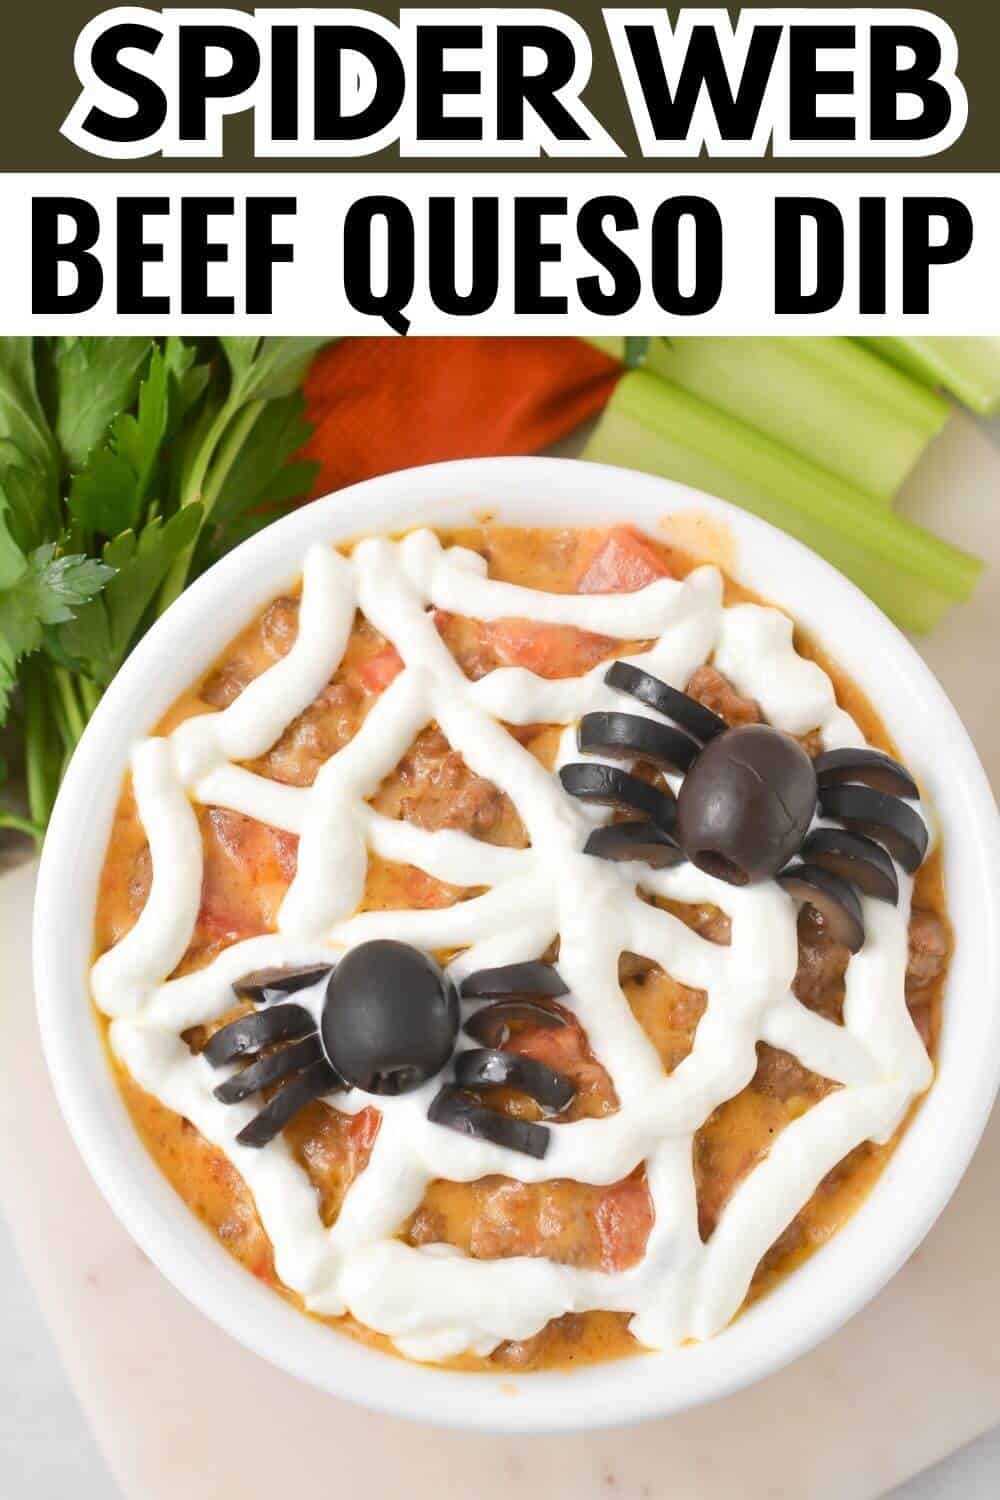 Spider web beef queso dip.